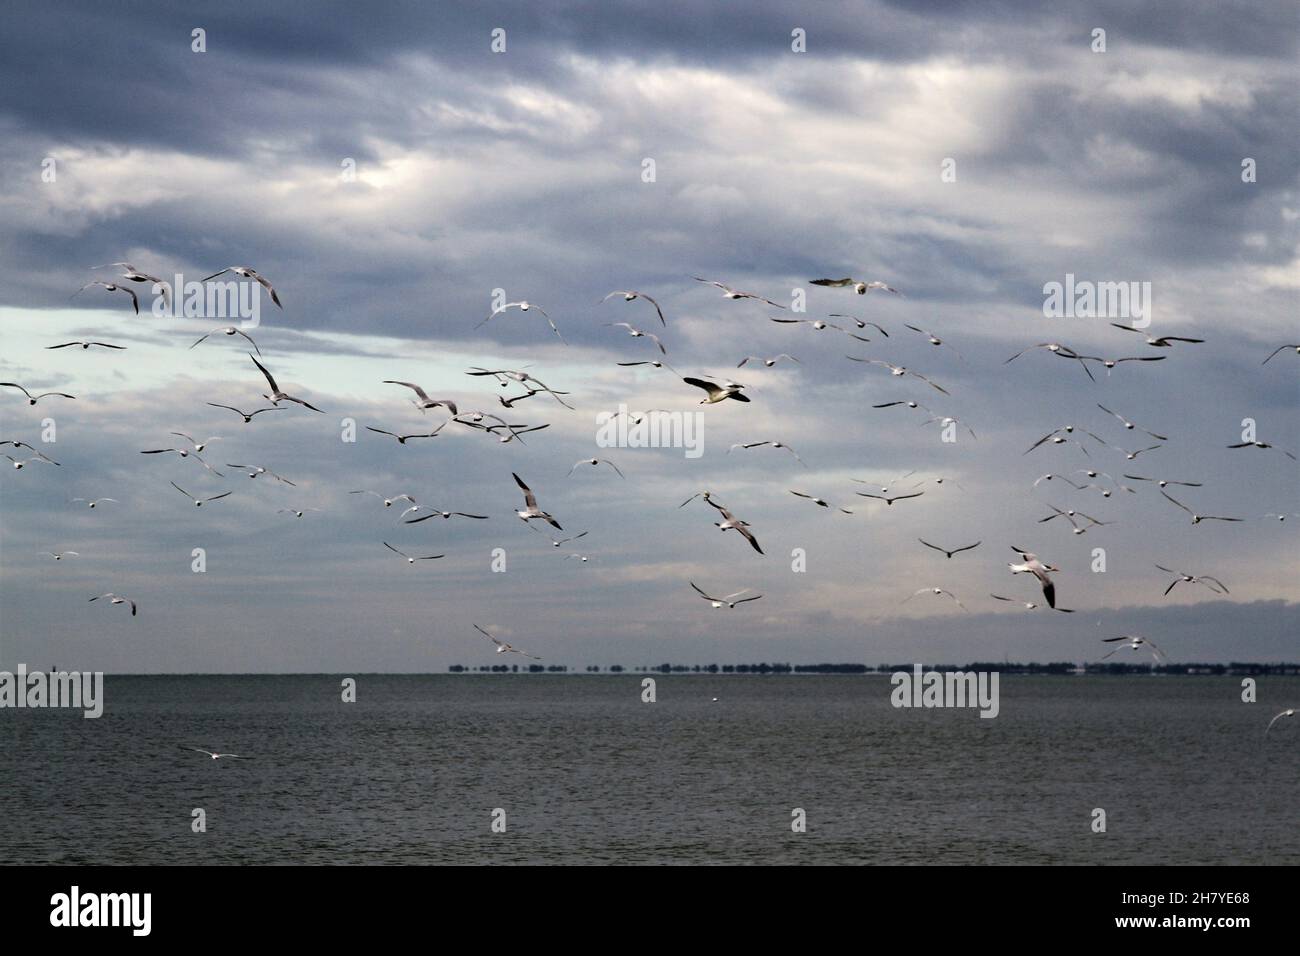 Birds flying over the water Stock Photo